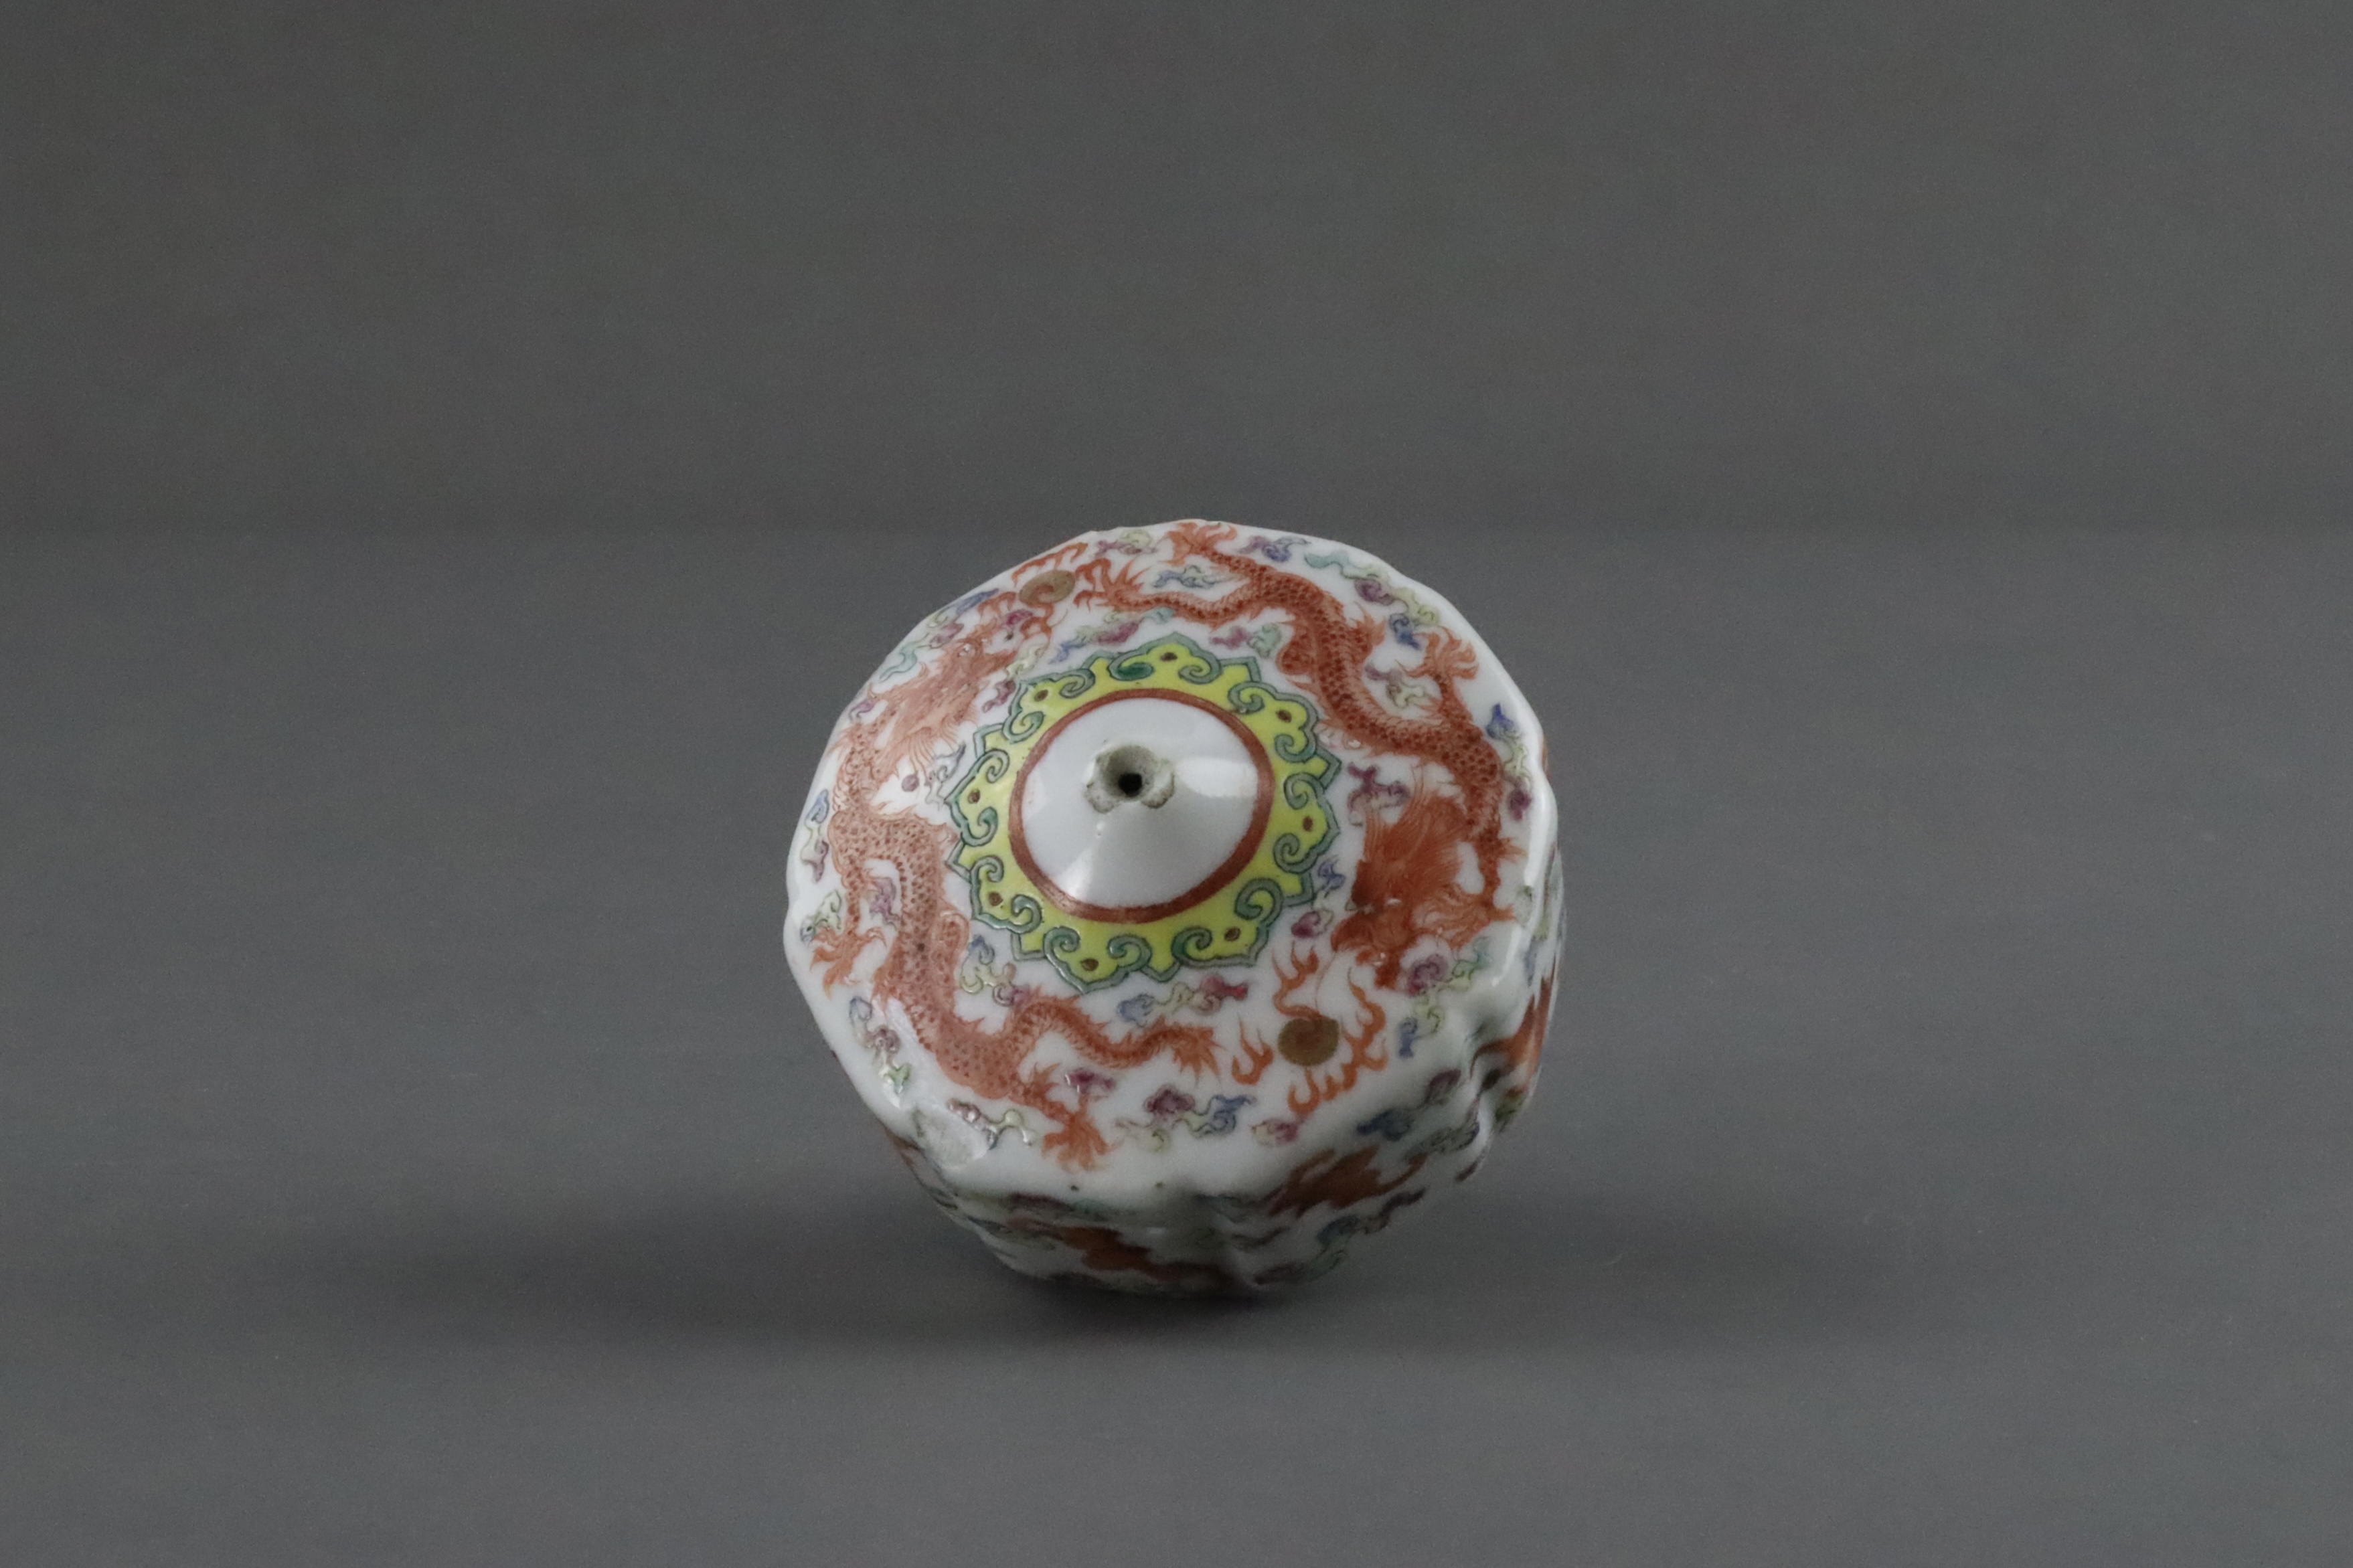 A Rare Porcelain Opium Pipe Bowl, four character mark, 19th century, - Image 2 of 8